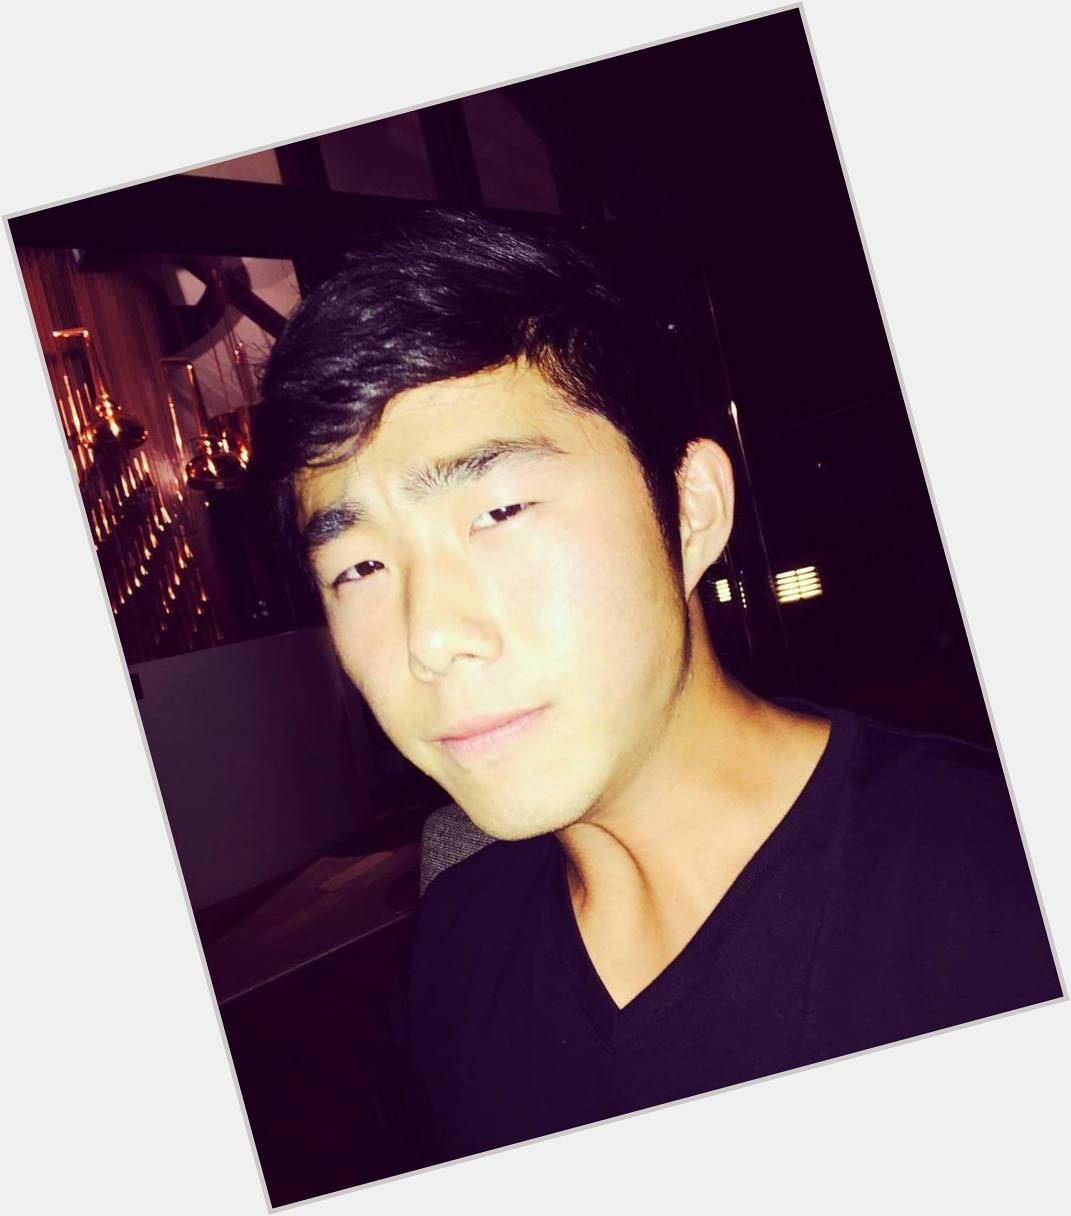 Eric Nam: Happy Birthday (baby) Brian! you are awesome and we so proud of you. Love you bro. Yall go wish t 